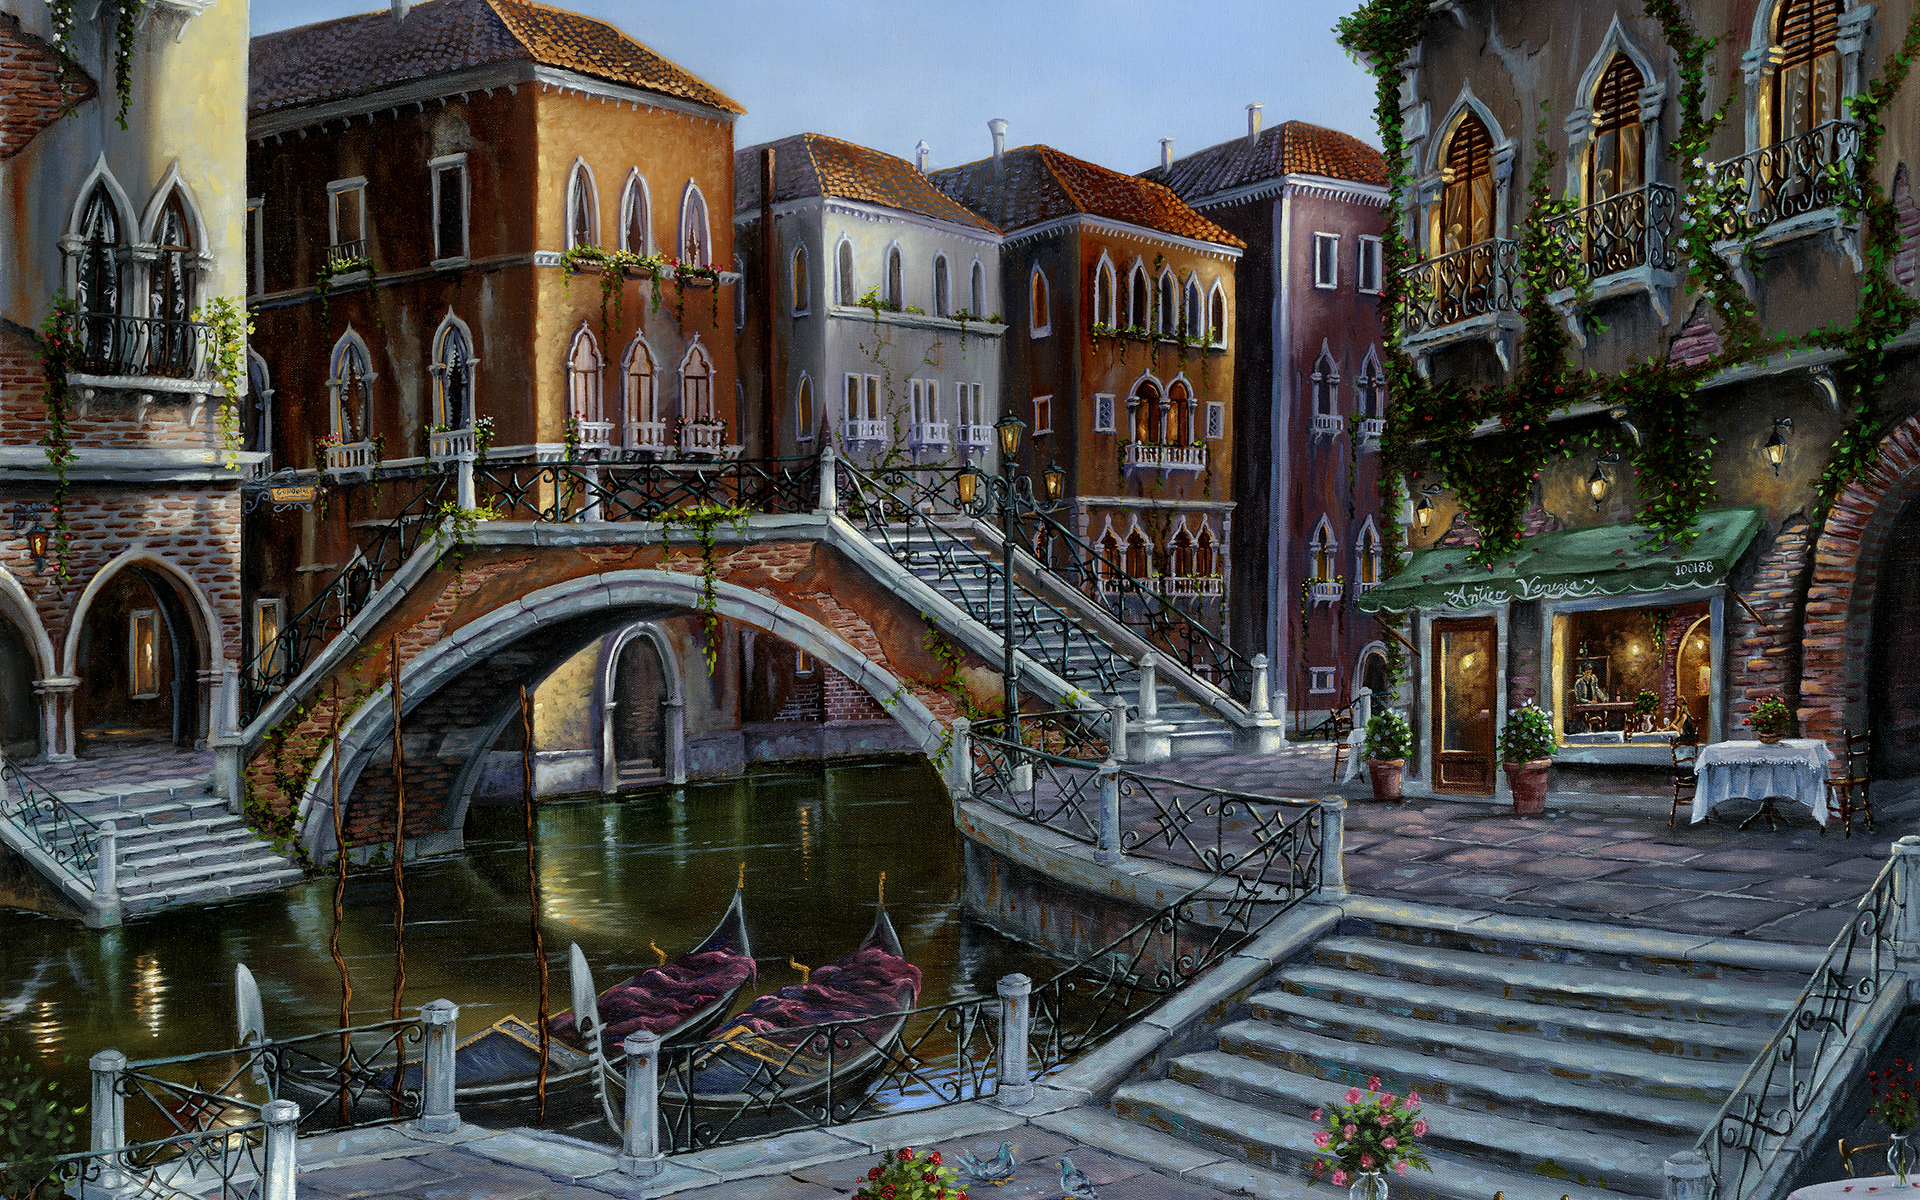 robert, Finale, Venician, Venice, Italy, Art, Detail, Palce, Architecture, Cities, Buildings, Bridges, Sidewalk, Stairs, Rivers, Canal, Water, Way, Colors, Painting, Scenic Wallpaper